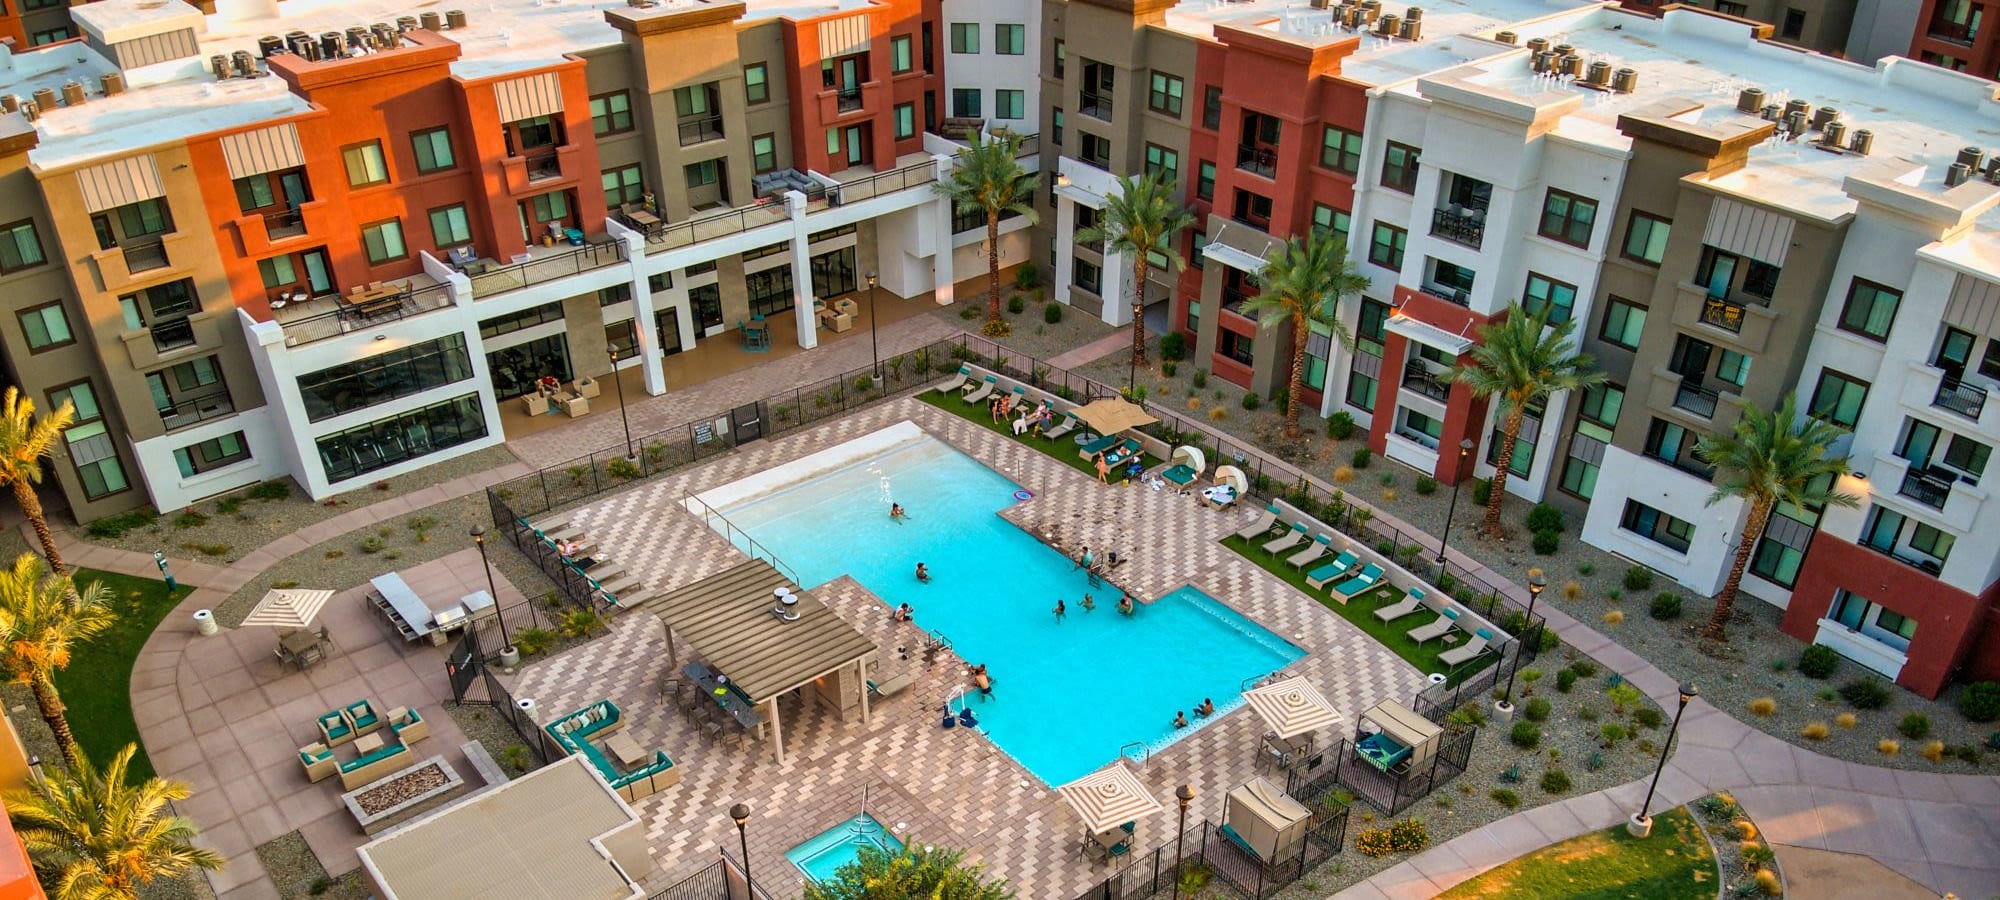 Apply to live at Marquis at Chandler in Chandler, Arizona